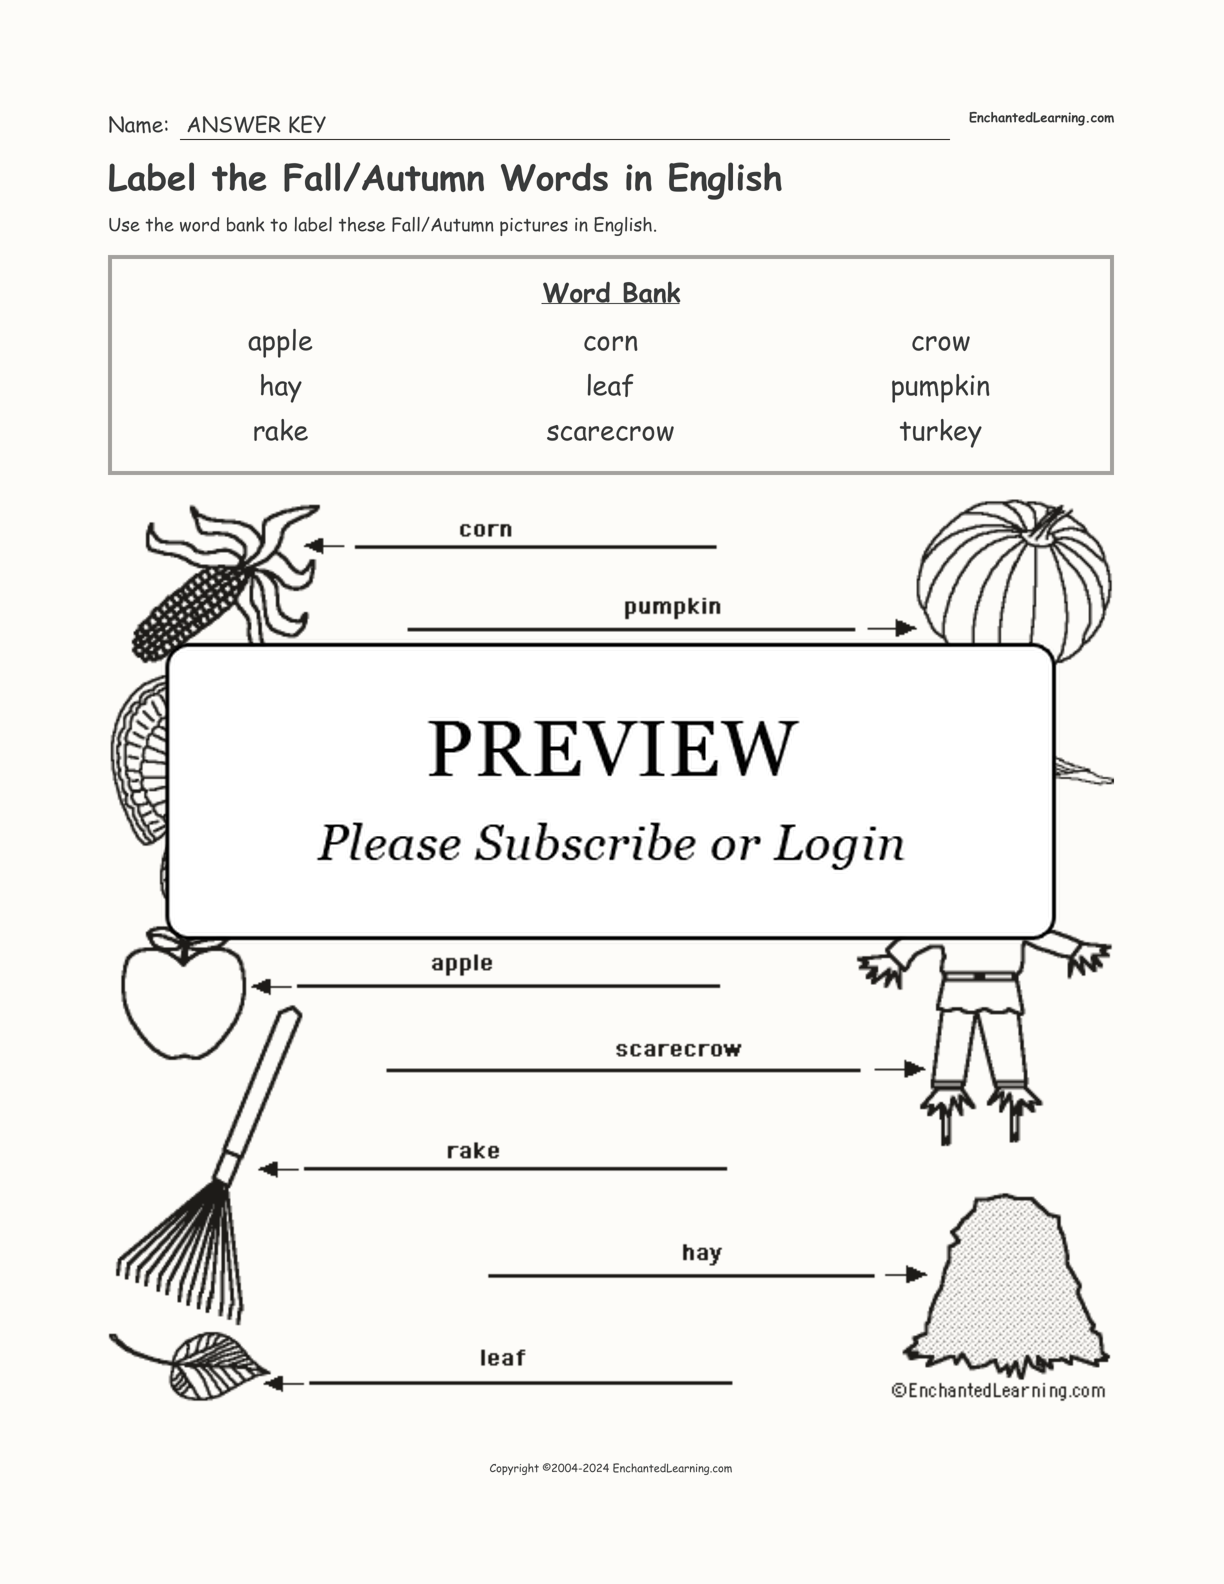 Label the Fall/Autumn Words in English interactive worksheet page 2